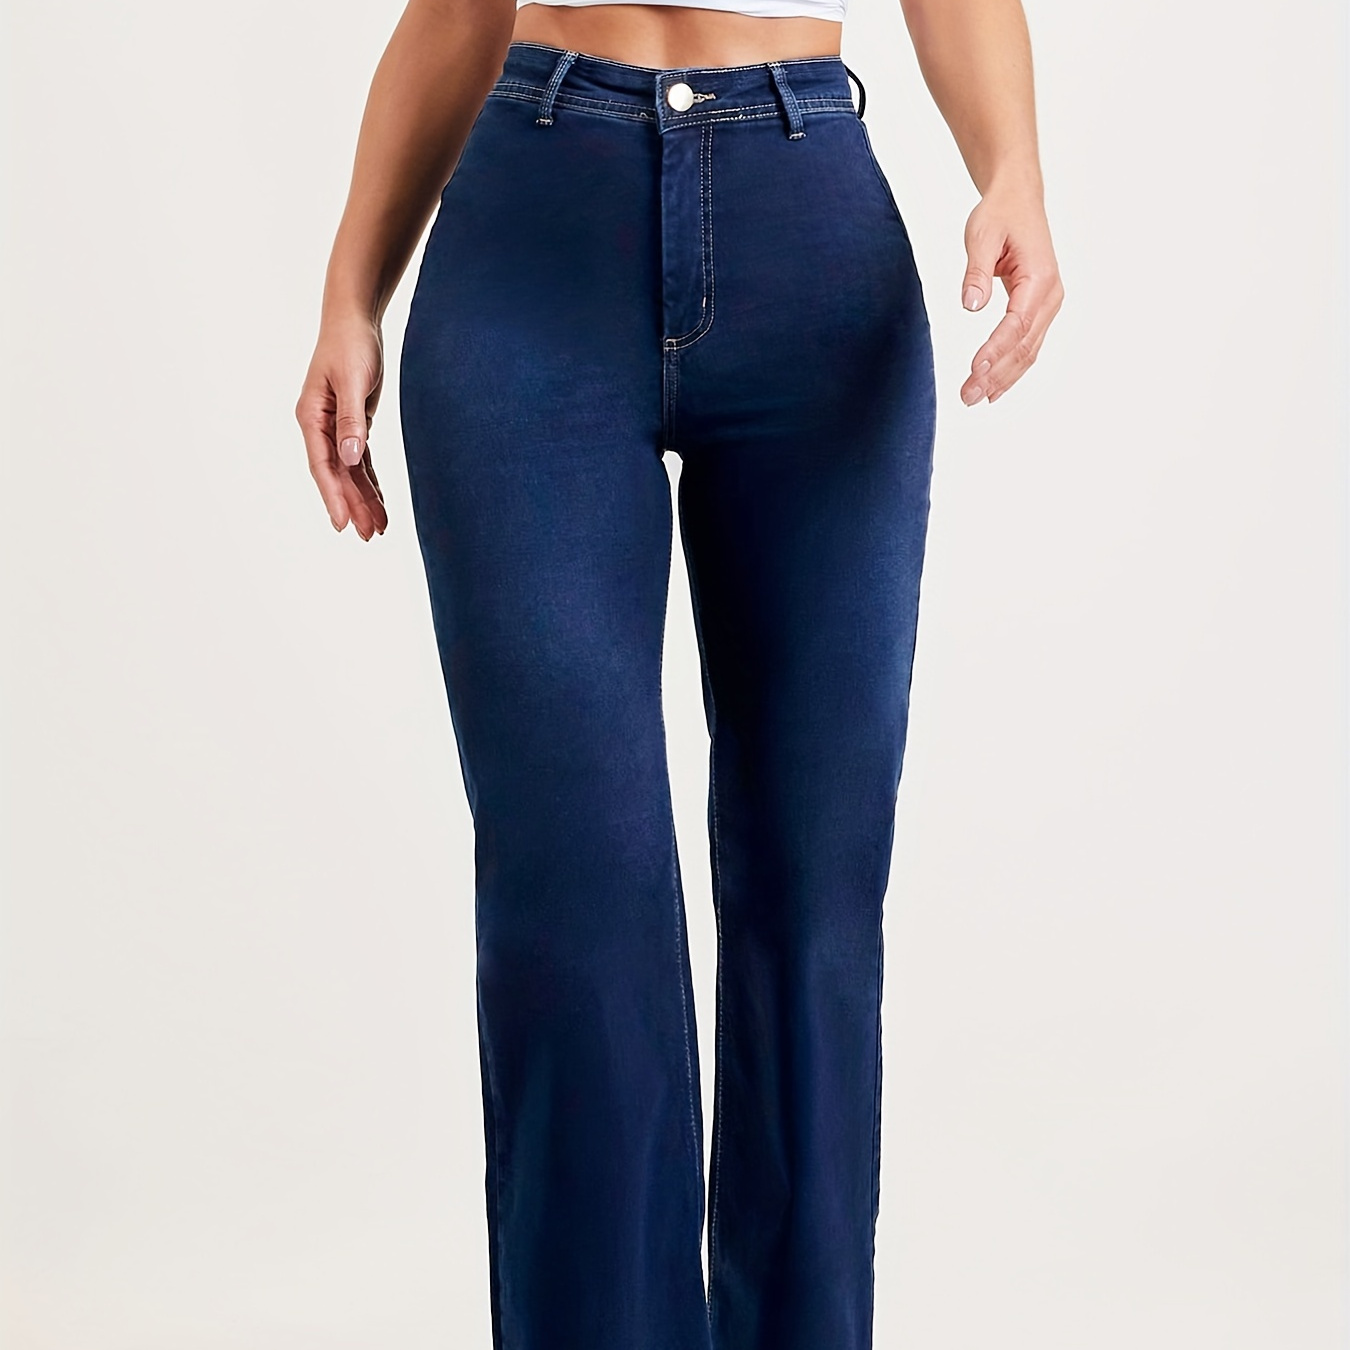 

Raw Hem Mid Rise Bootcut Denim Pants, Solid Color Navy Blue Medium Stretch Bell Bottoms Flare Jeans, Women's Denim Jeans & Clothing